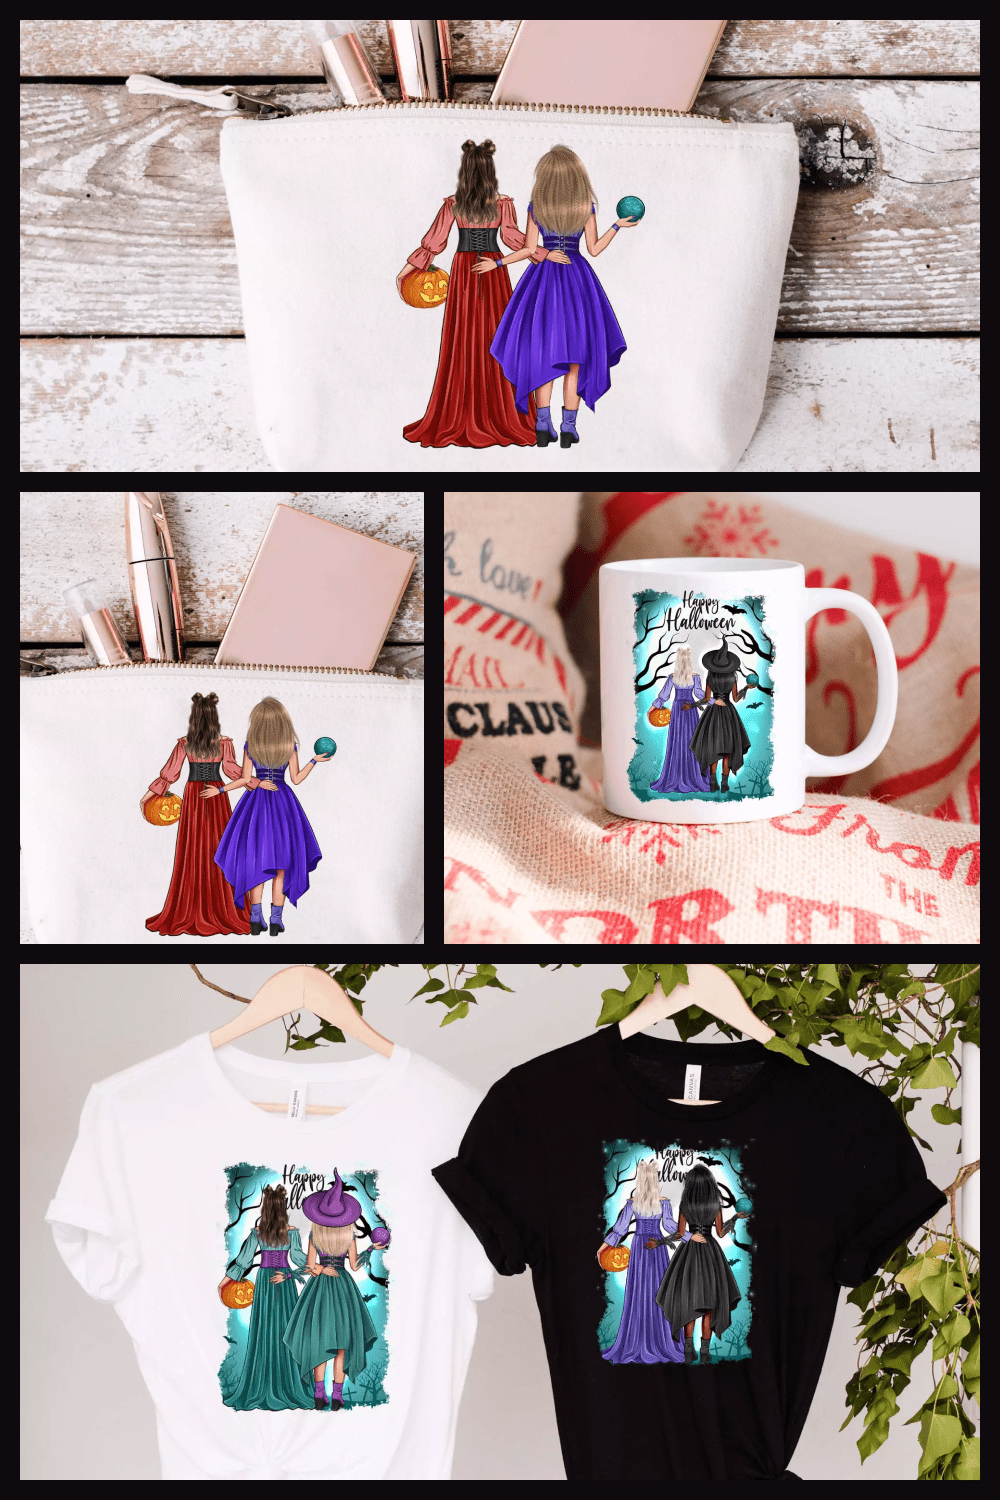 Two witches in a red and purple dress from the back on a bag, mug, t-shirts.